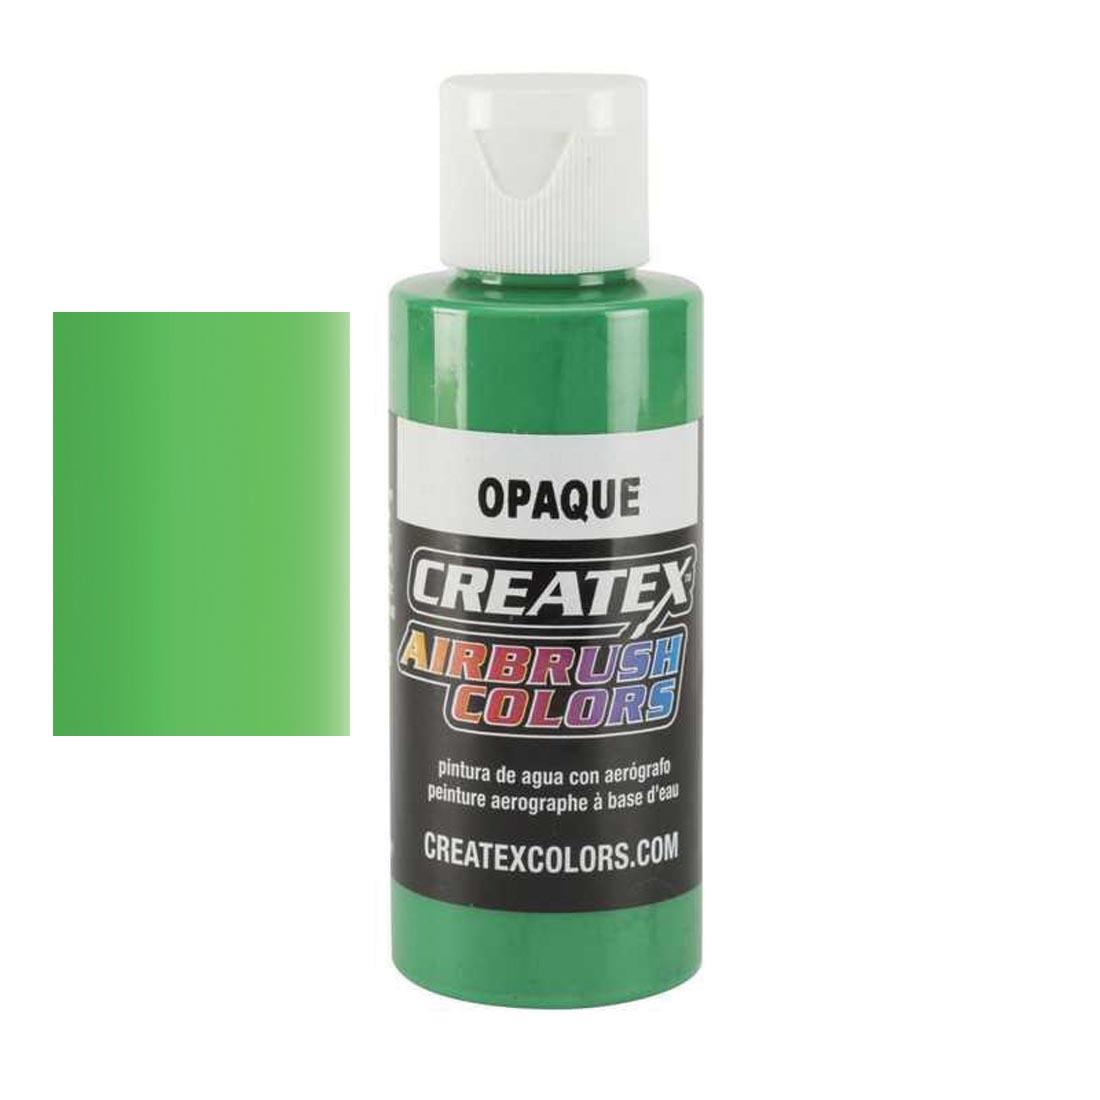 Bottle of Createx Airbrush Color Beside Opaque Light Green Color Swatch